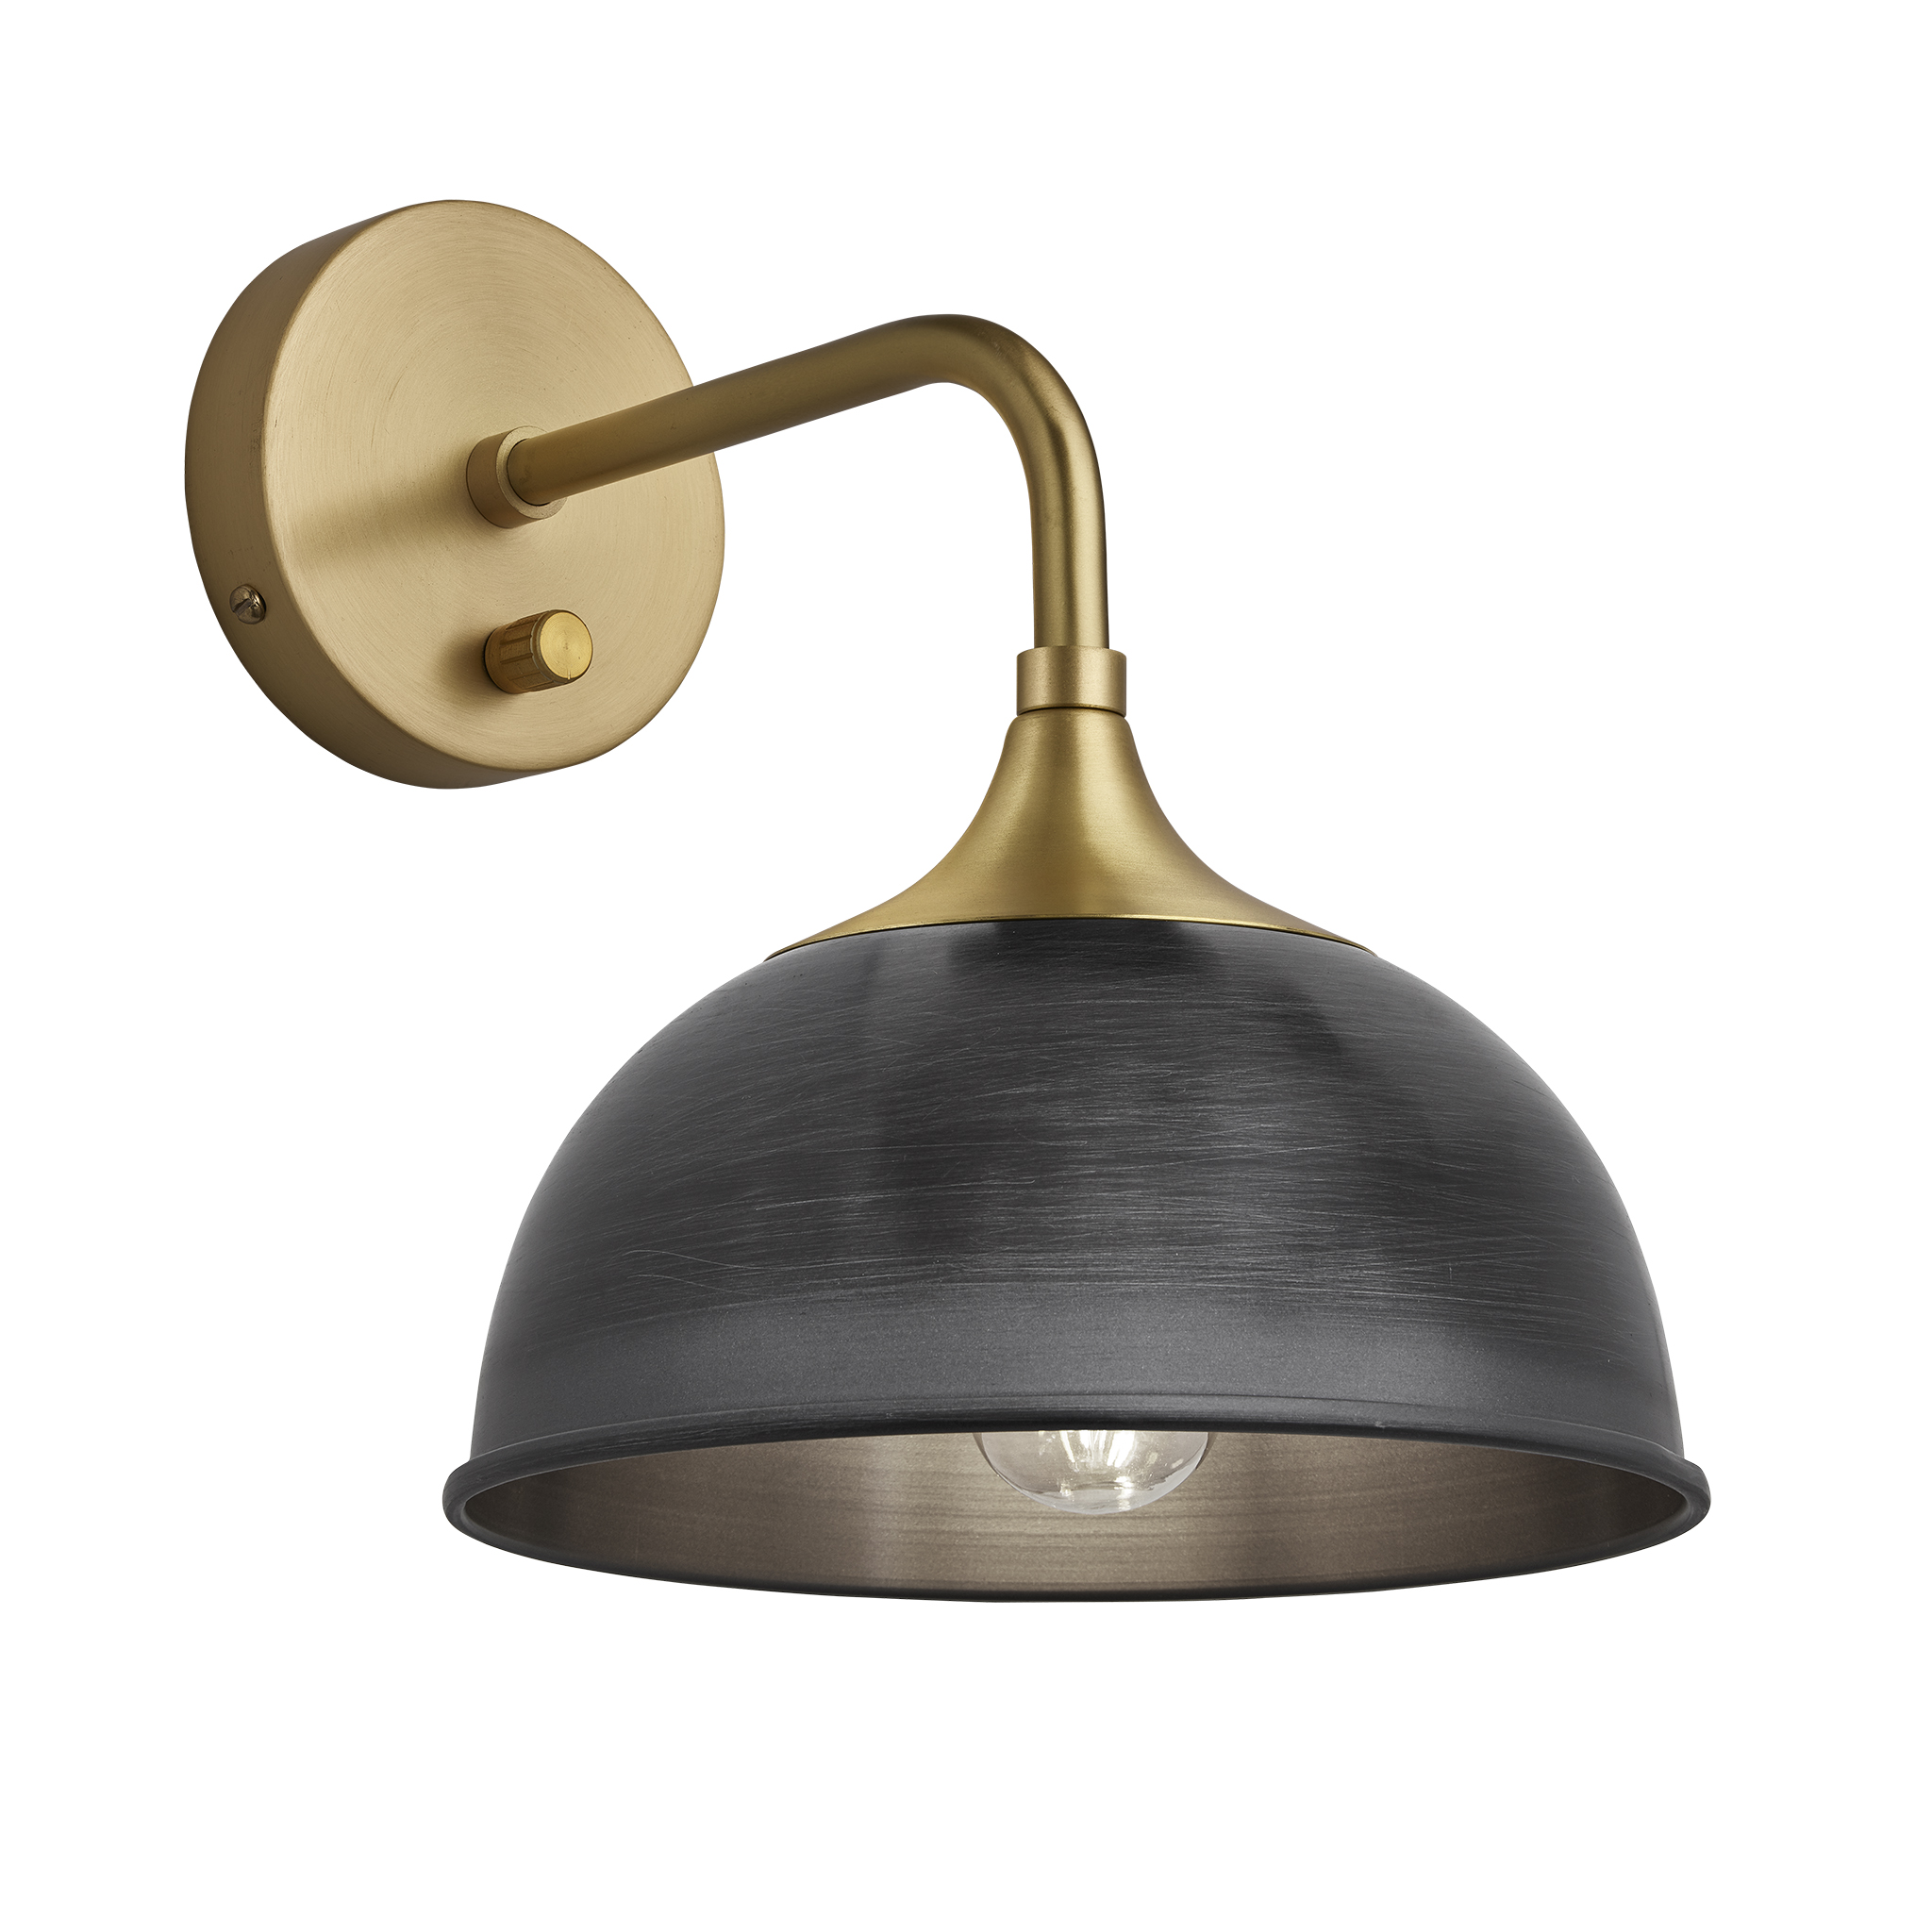 Chelsea Dome Wall Light - 8 Inch - Pewter - Brass Holder